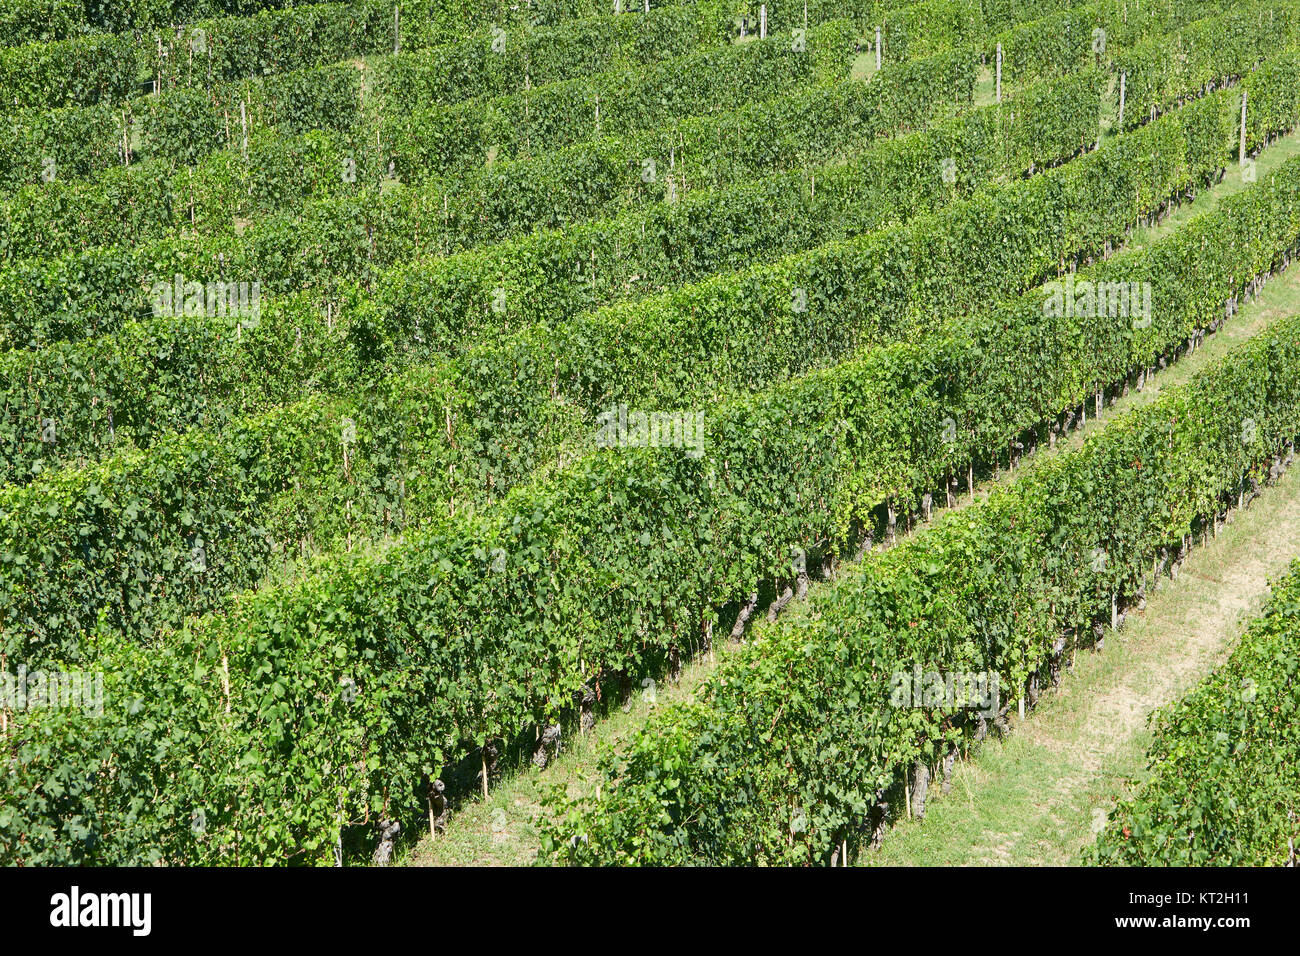 Green vineyards in a sunny day, high angle view Stock Photo